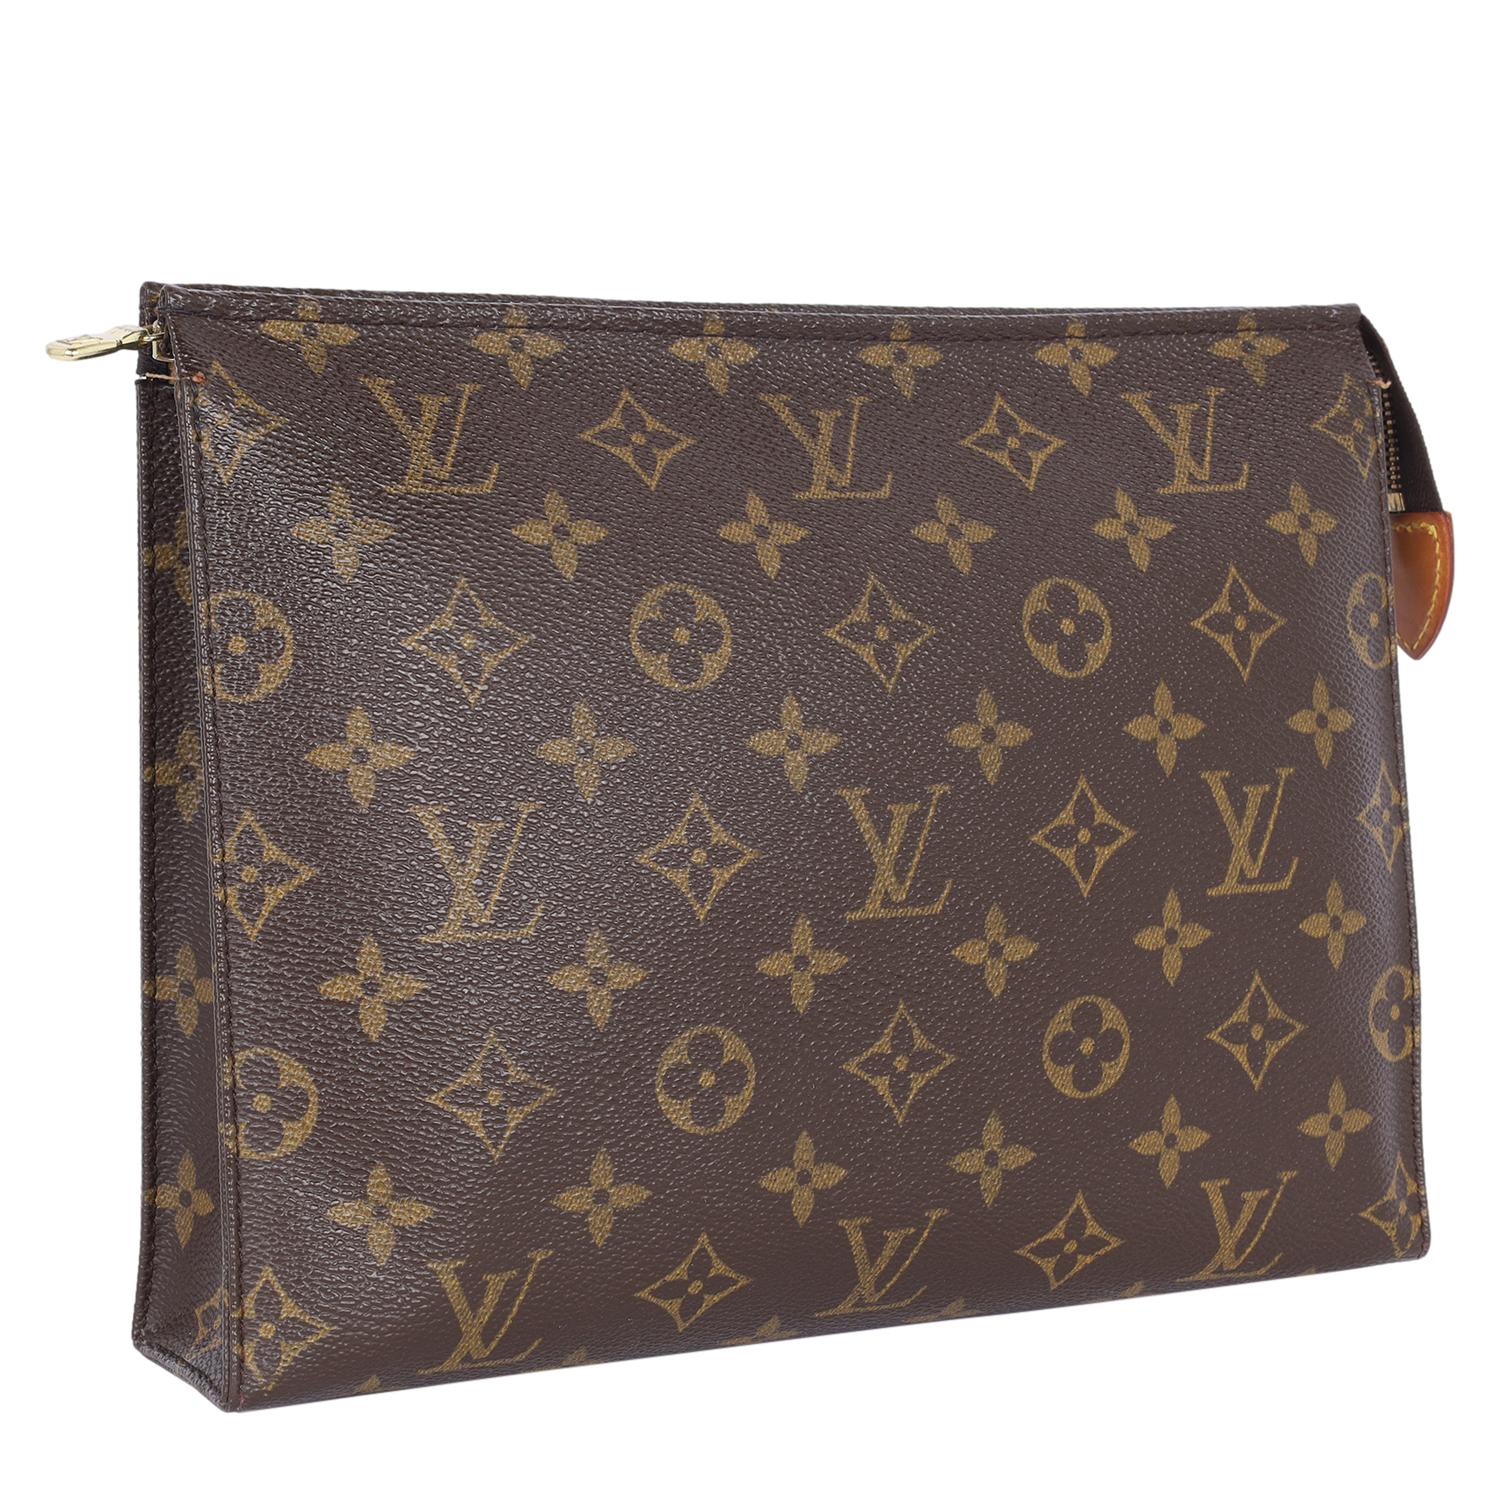 Authentic, pre owned Louis Vuitton monogram toiletry pouch 26 cosmetic bag. Features monogram canvas, zipper top closure, and large washable interior. You're going to love the perfect size of this bag for your cosmetics.

Authenticity date code: